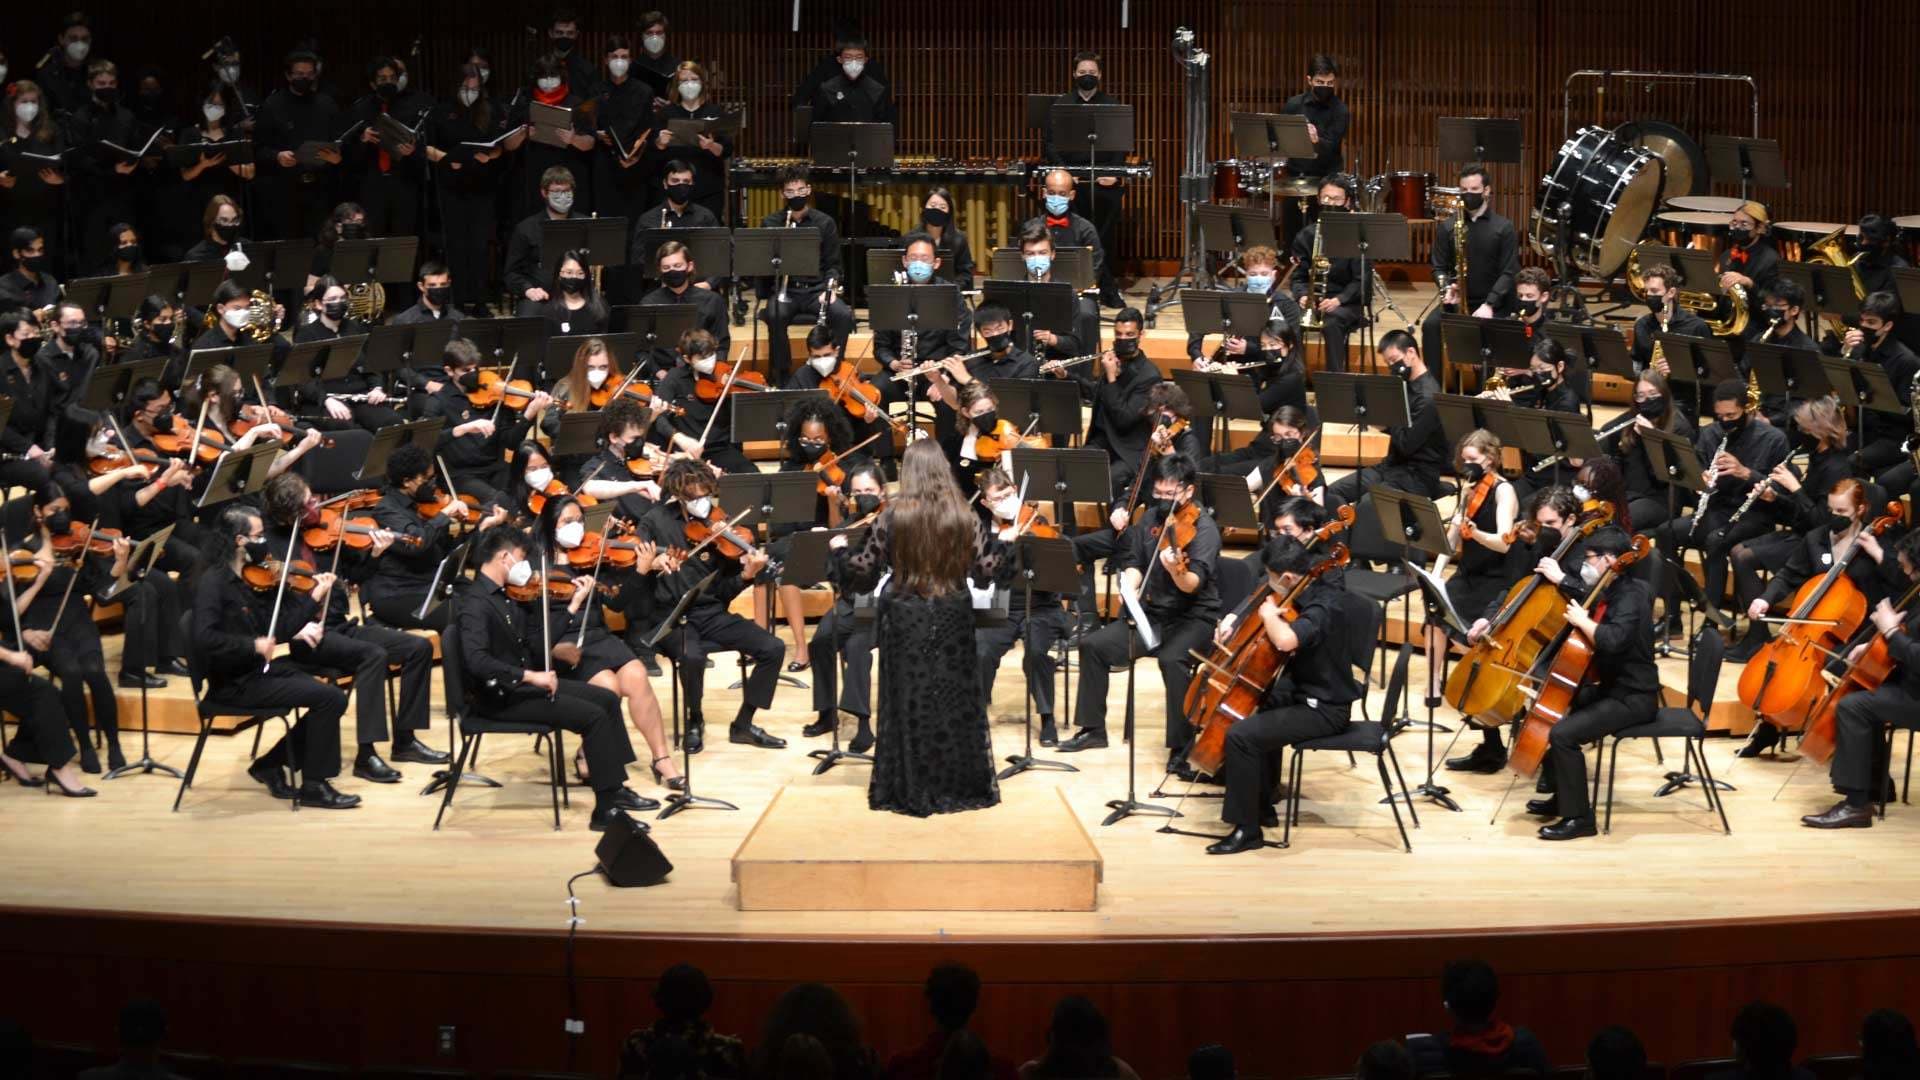 Gamer Symphony Orchestra performs on stage